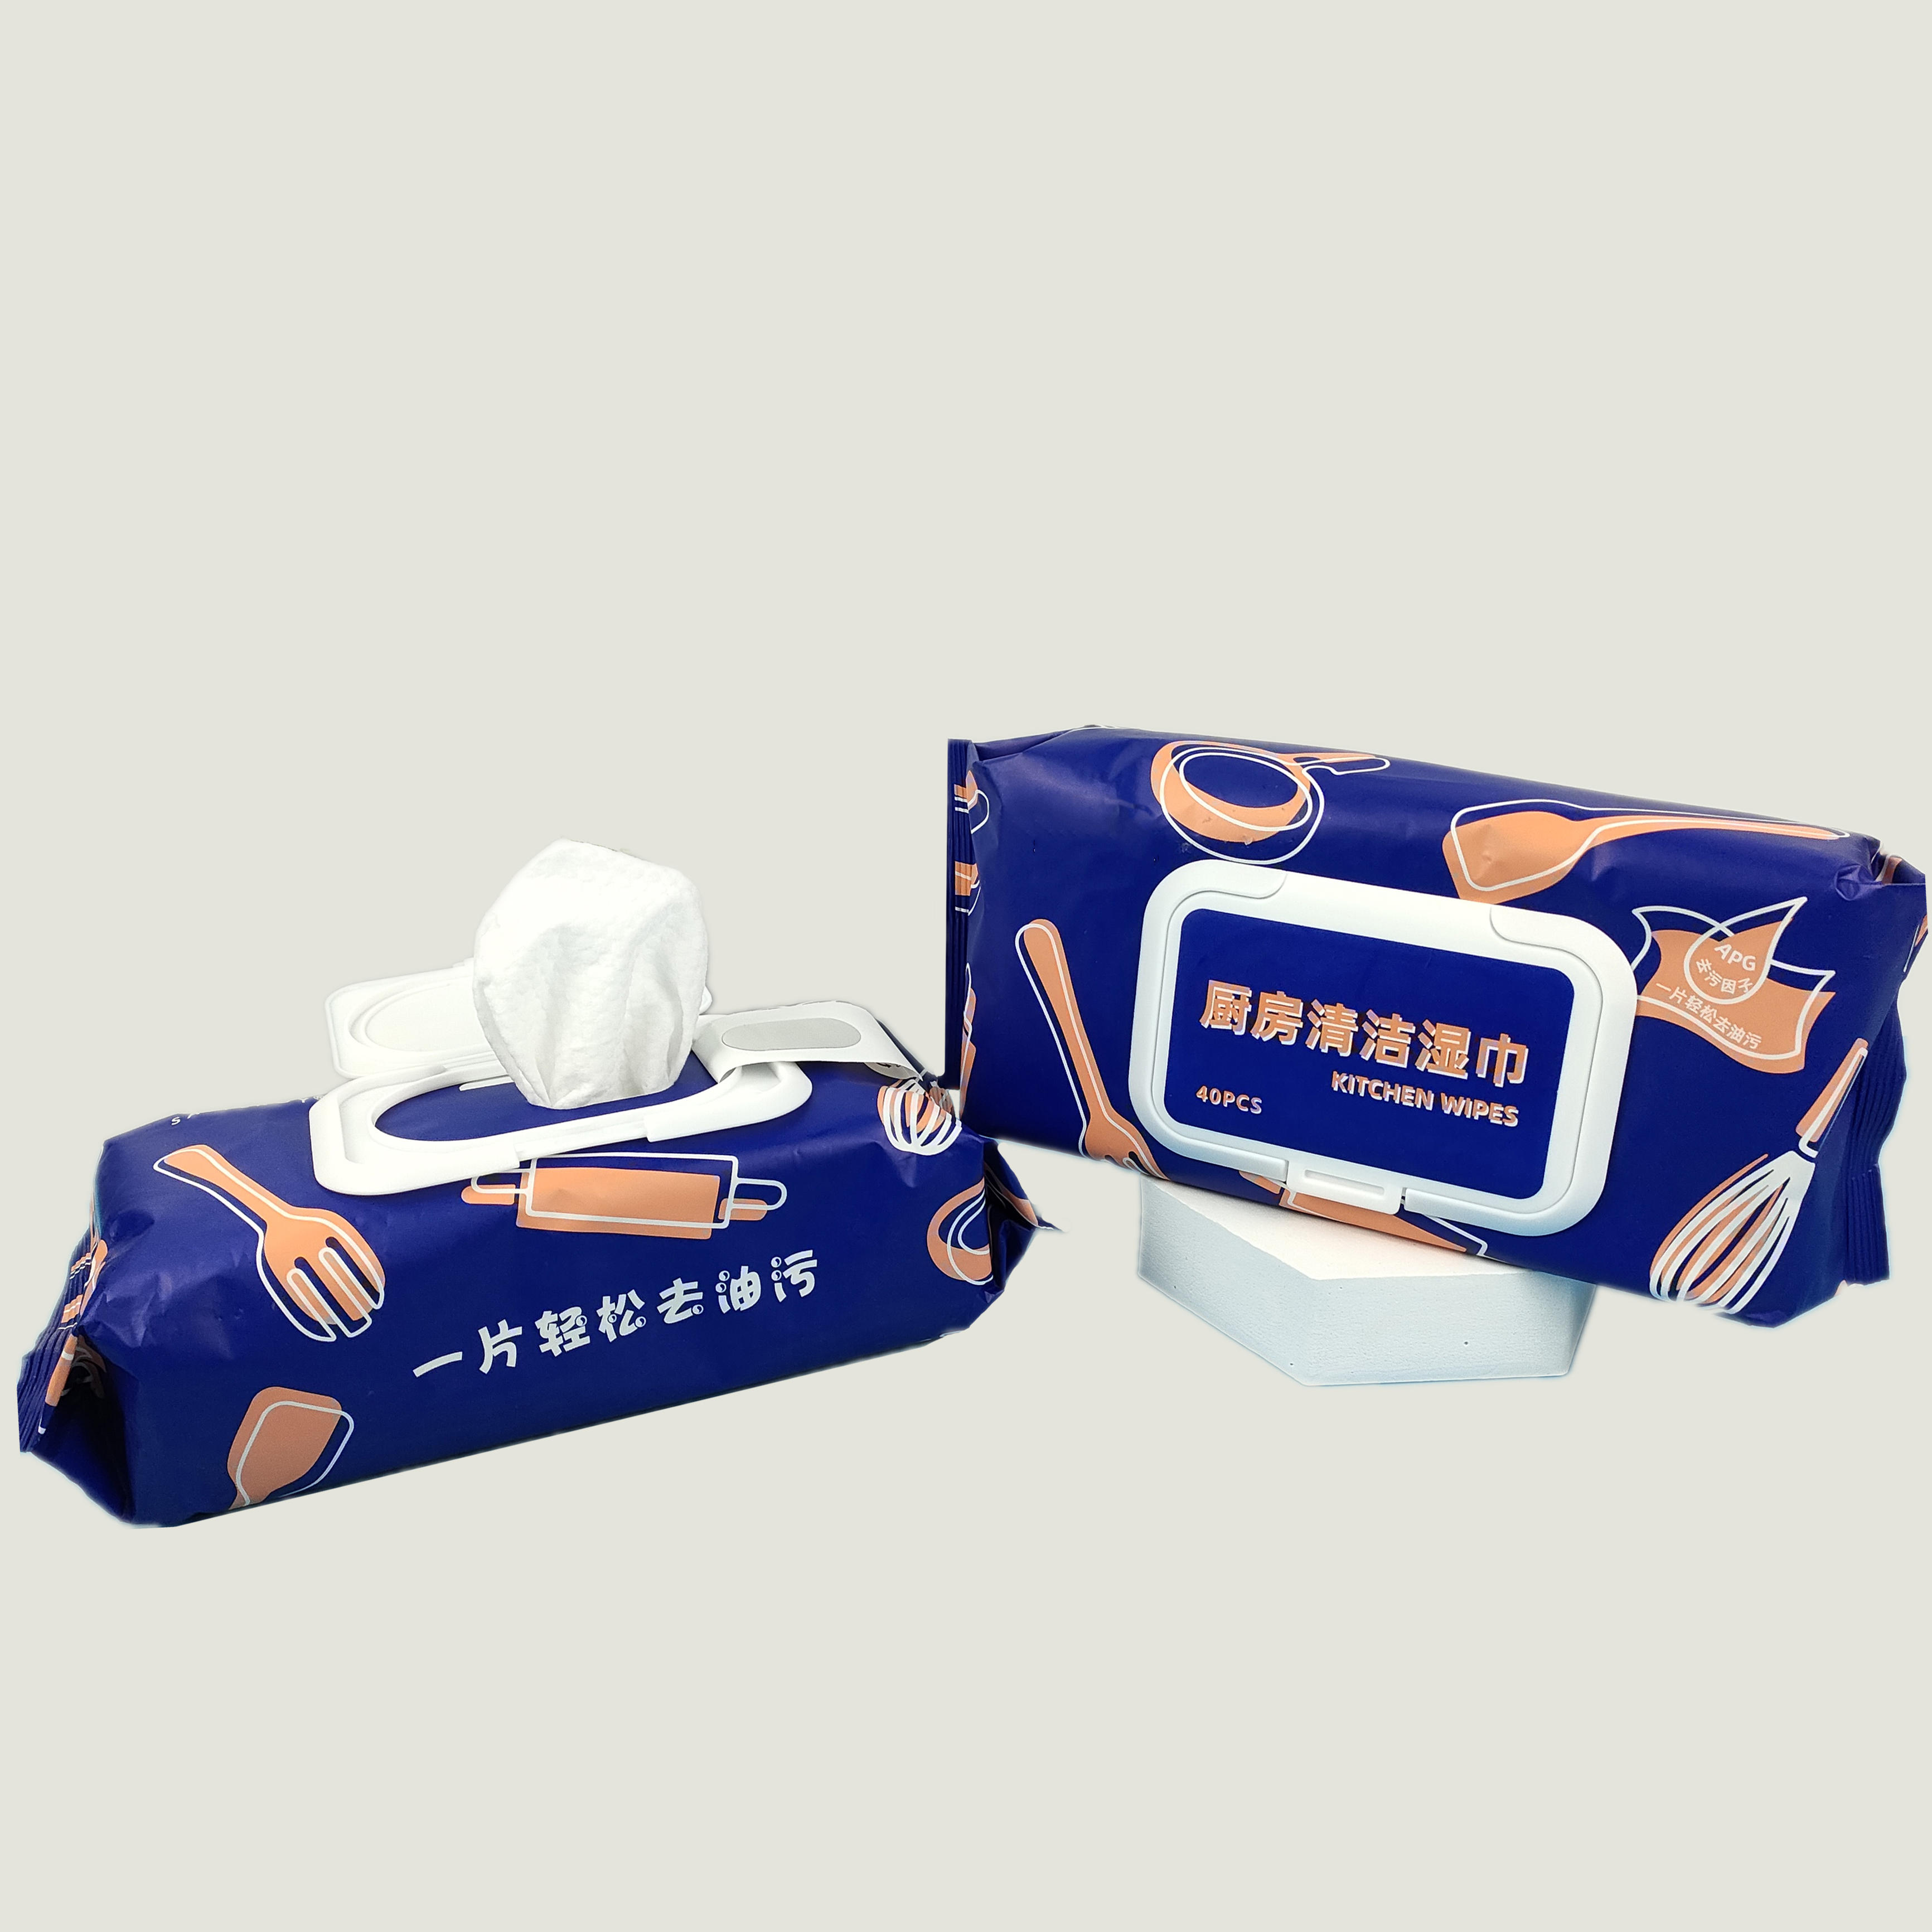 Kitchen Wet Wipes Manufacturer 40pcs All Purpose Bamboo Cleaning Wipes